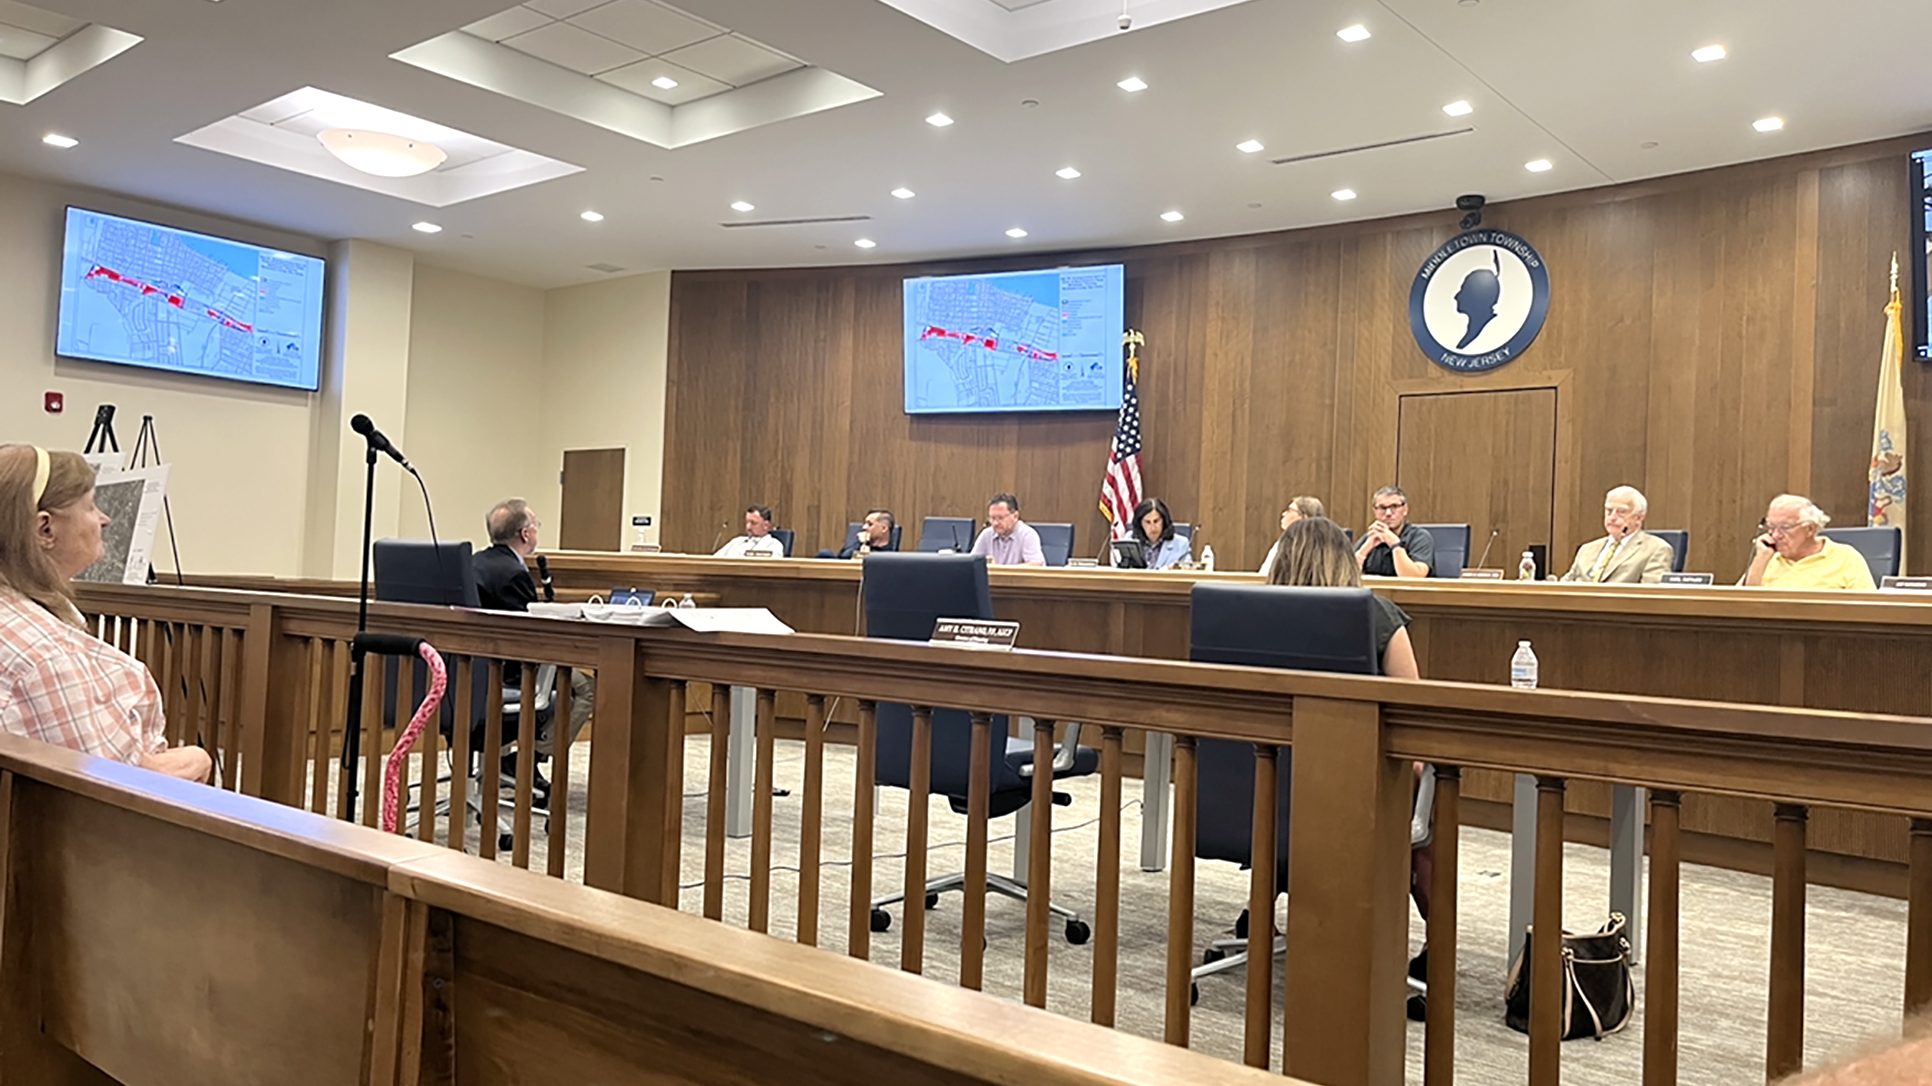 At the third and final public meeting about the revitalization of Route 36, the Middletown planning board voted unanimously to approve all the properties recommended in the improvement study as areas in need of redevelopment. Sunayana Prabhu